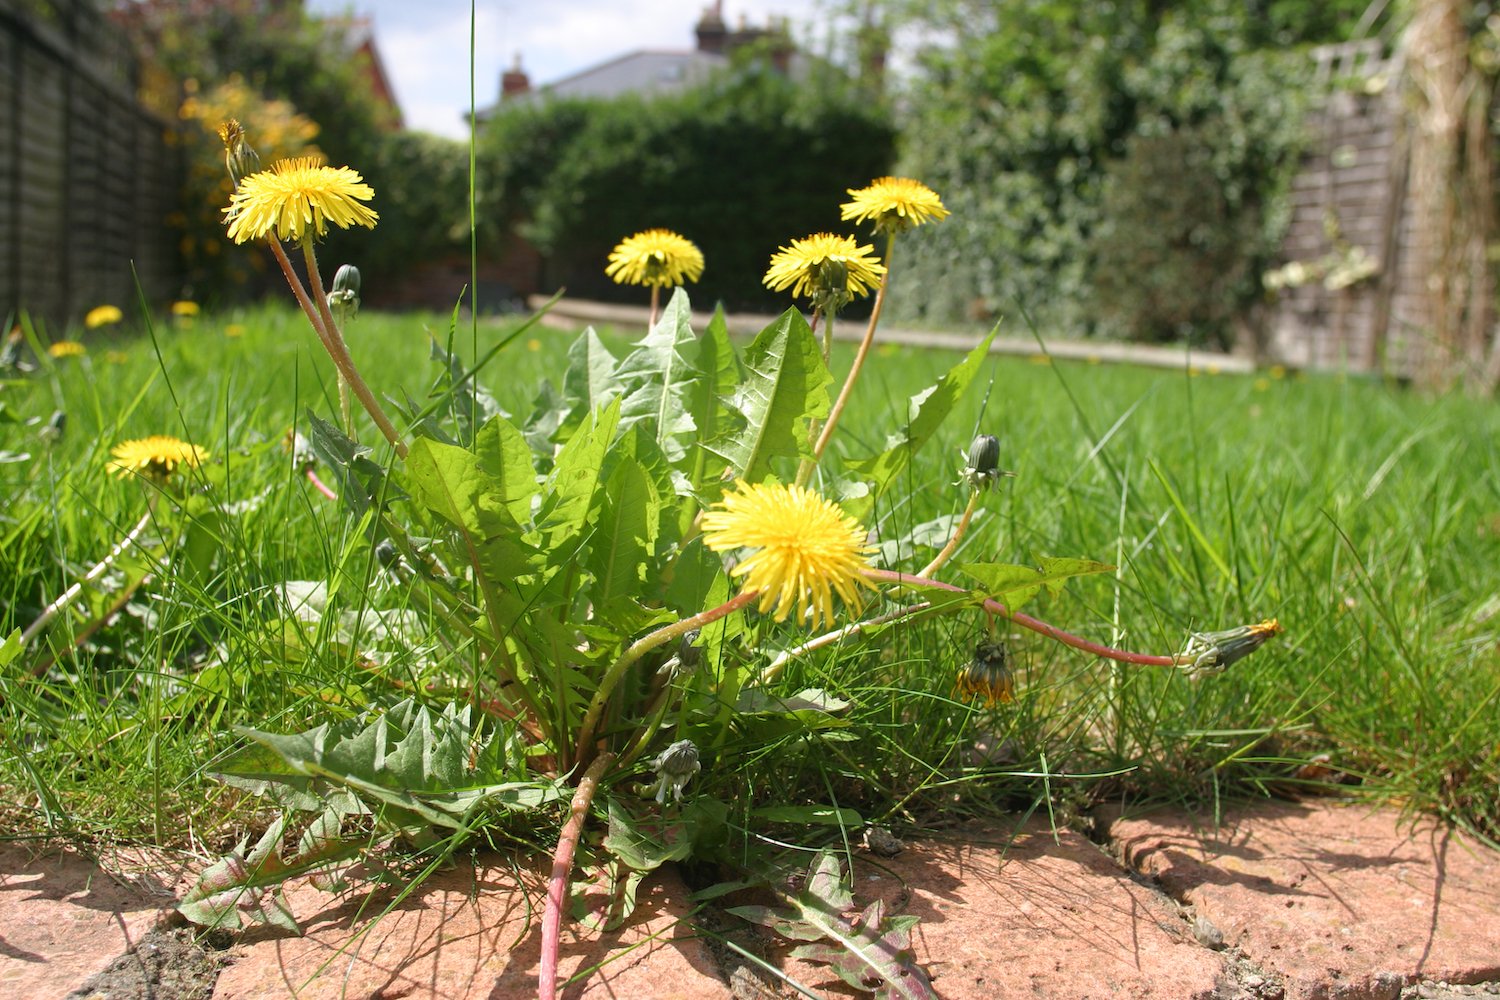 Pesky weeds ruining your lawn